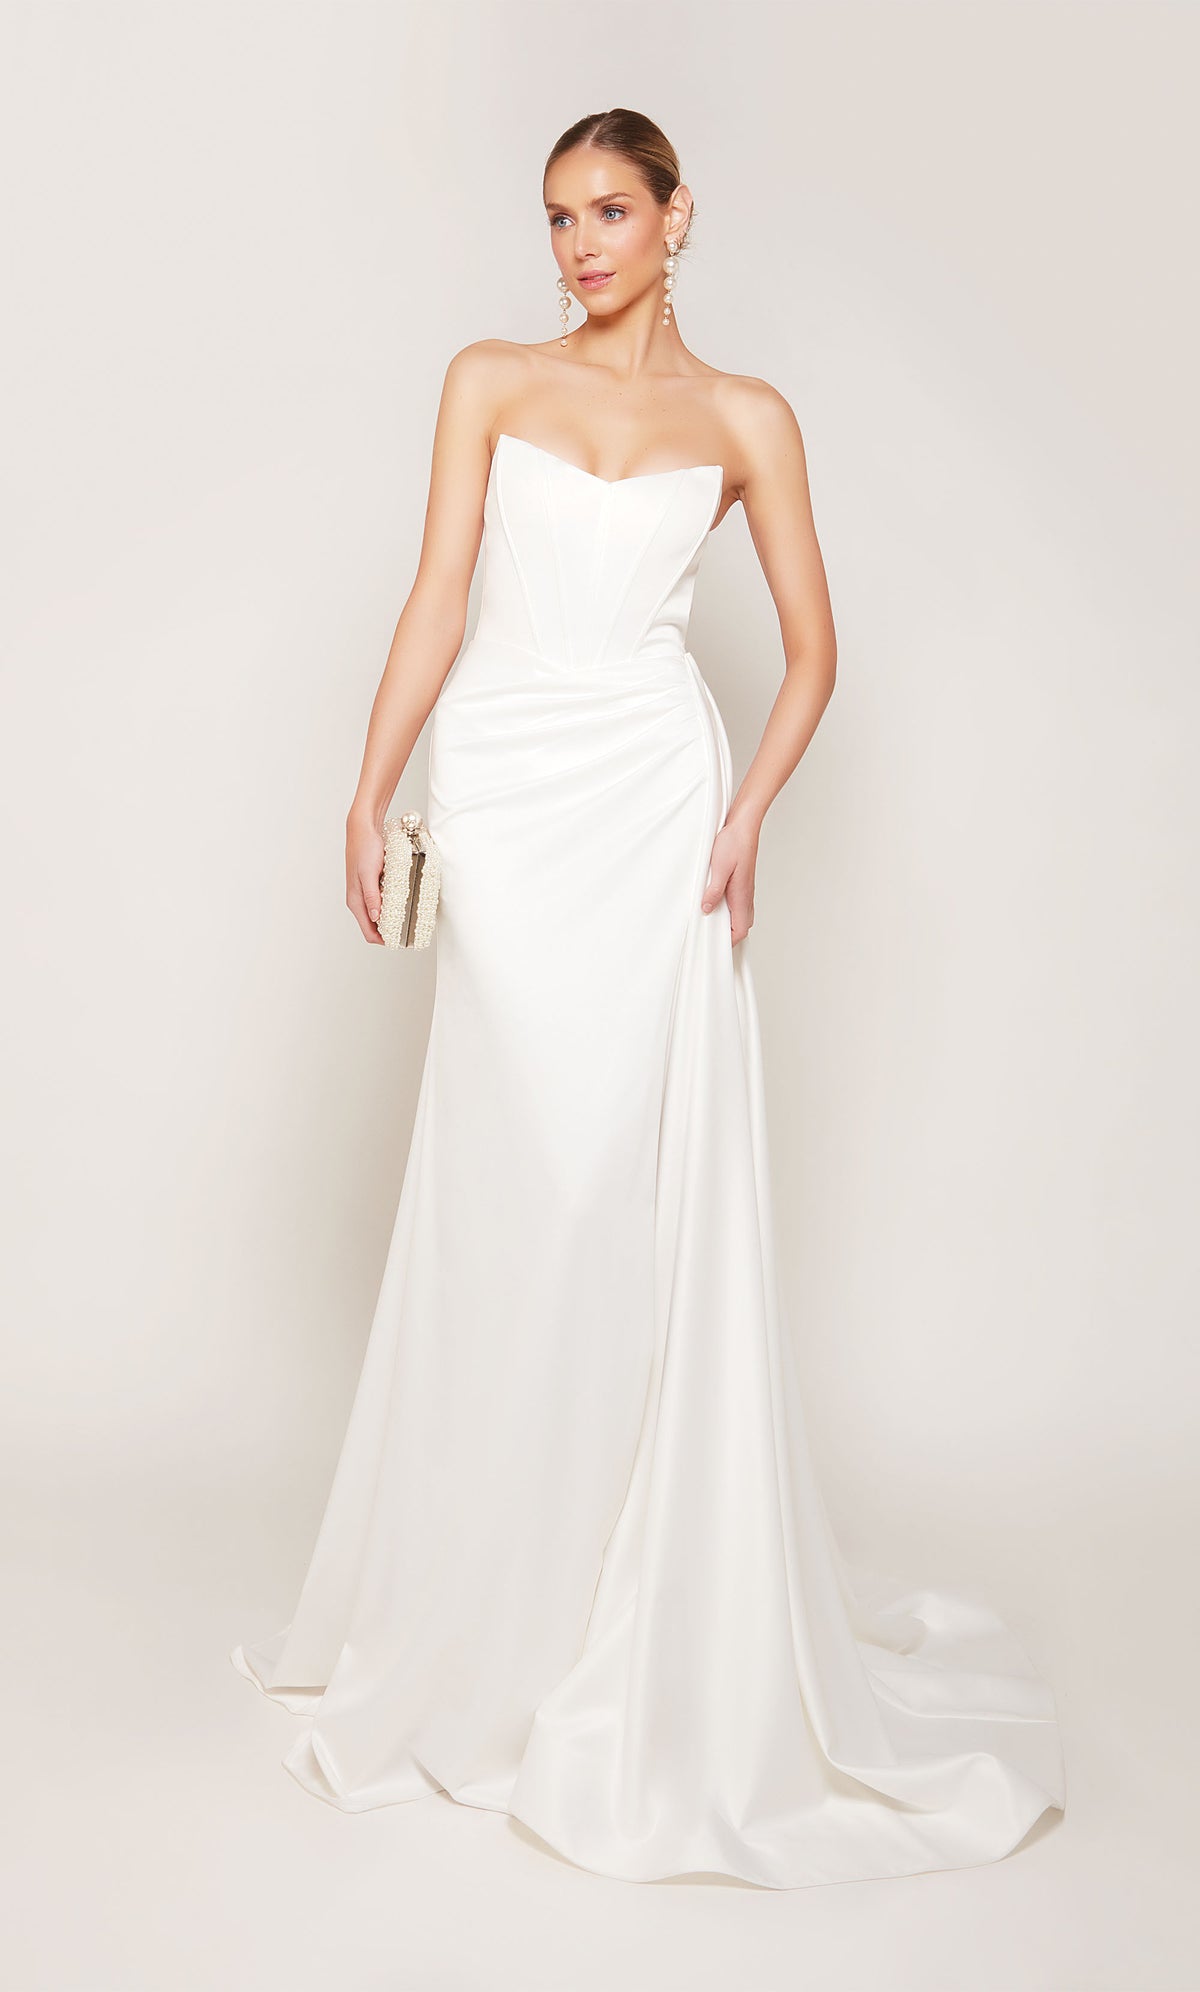 A strapless, corset wedding dress with a ruched waist, an elegant side slit, and detachable side train for a dramatic effect.